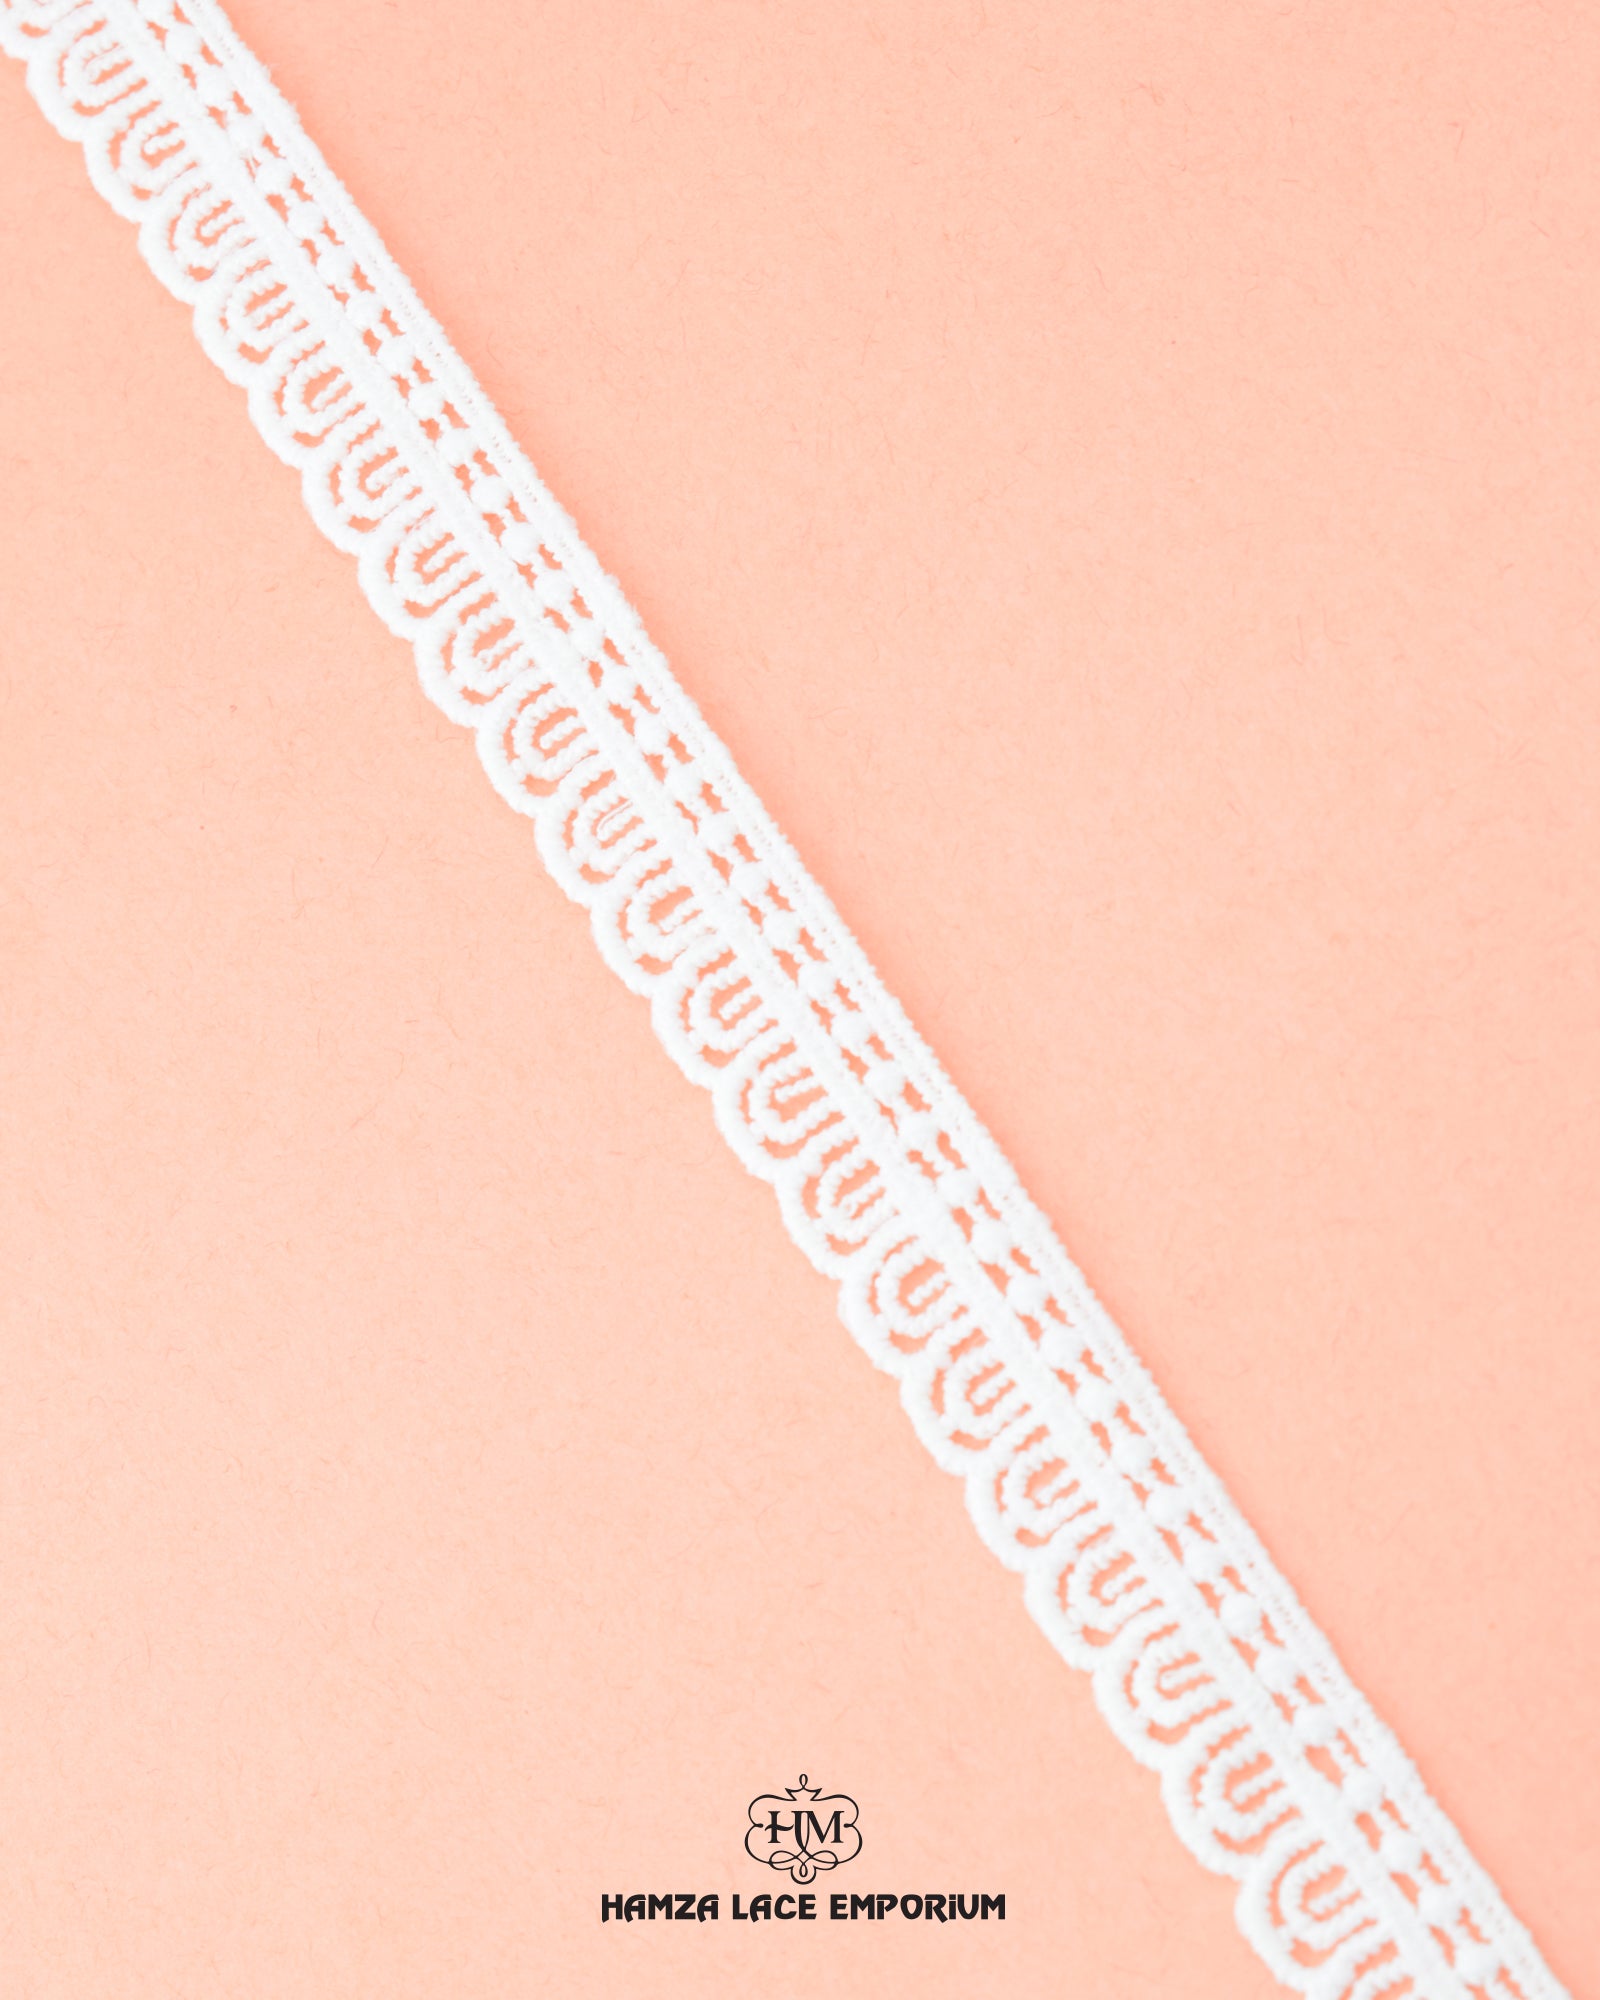 'Edging Loop Lace 23601' with the 'Hamza Lace' sign at the bottom